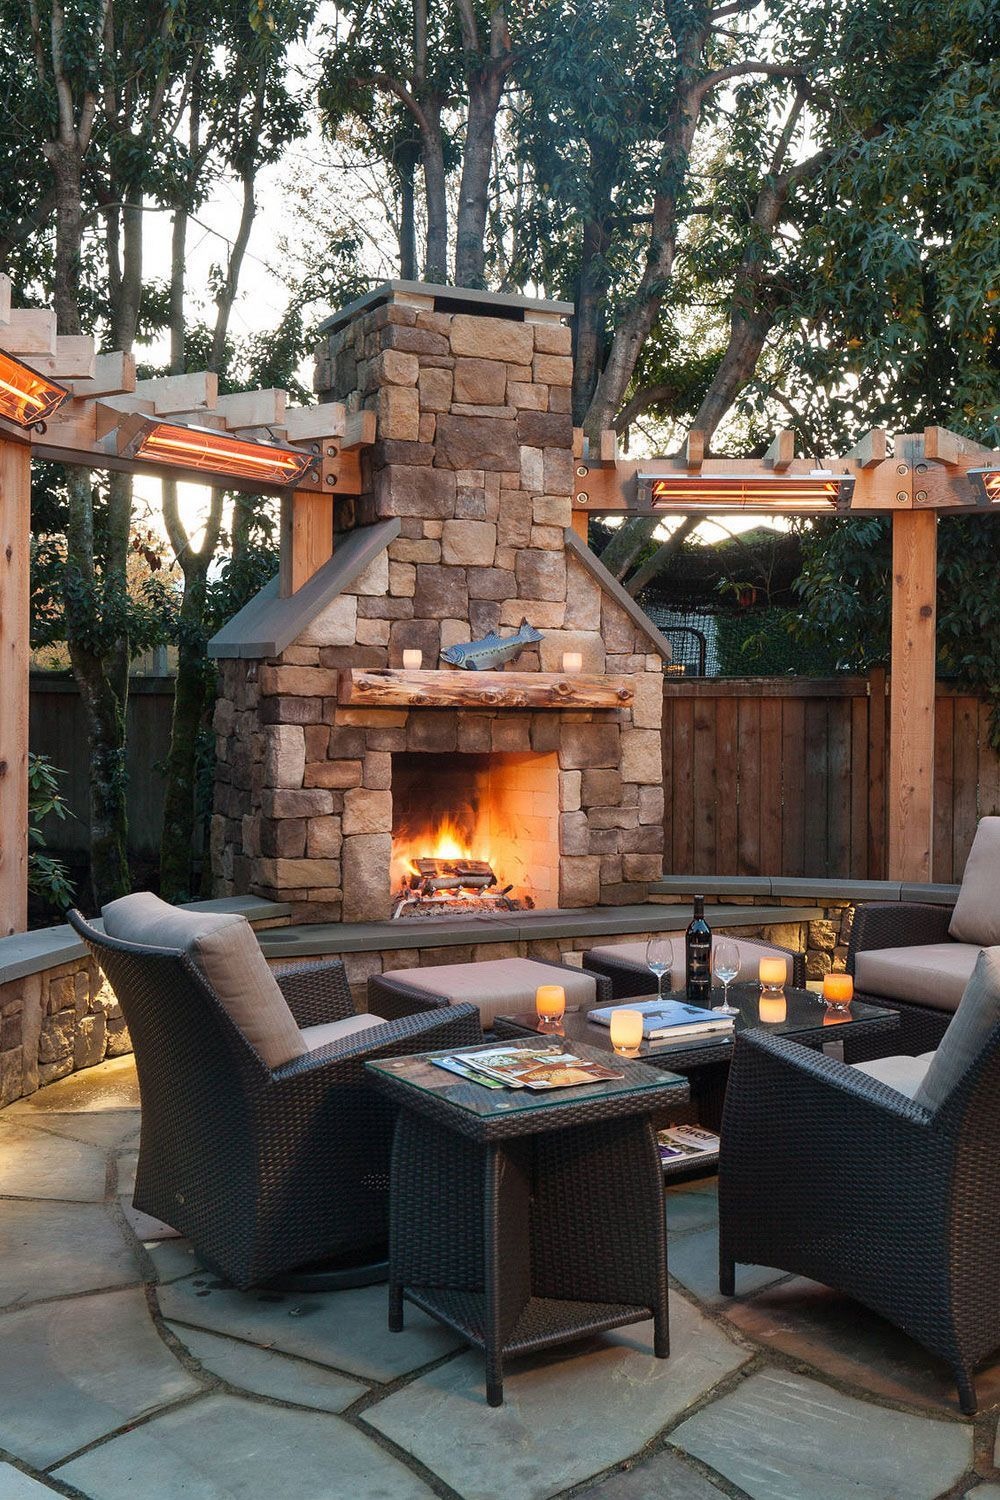 A Warm and Cozy Outdoor Fireplace